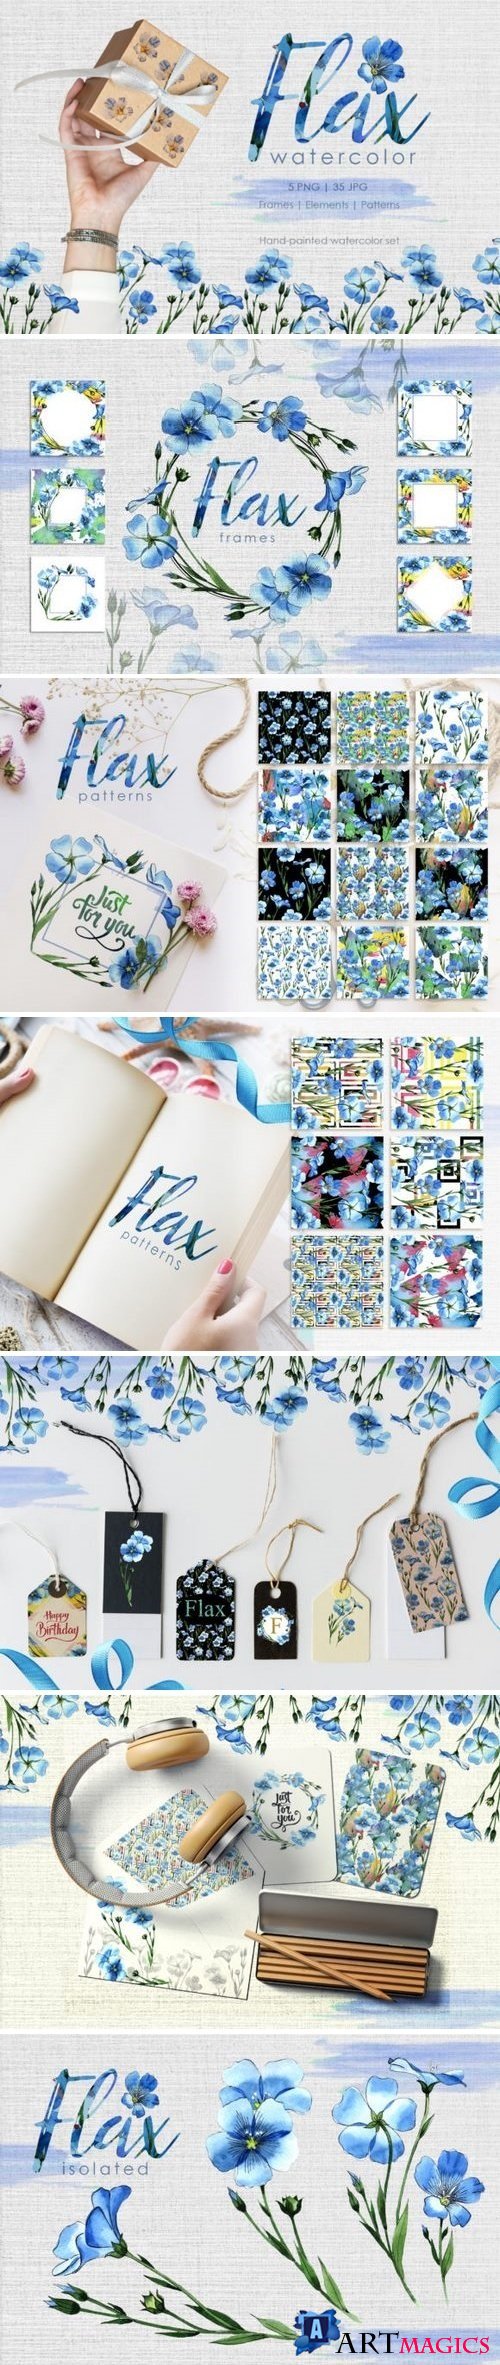 Flax blue Watercolor png - 3358680